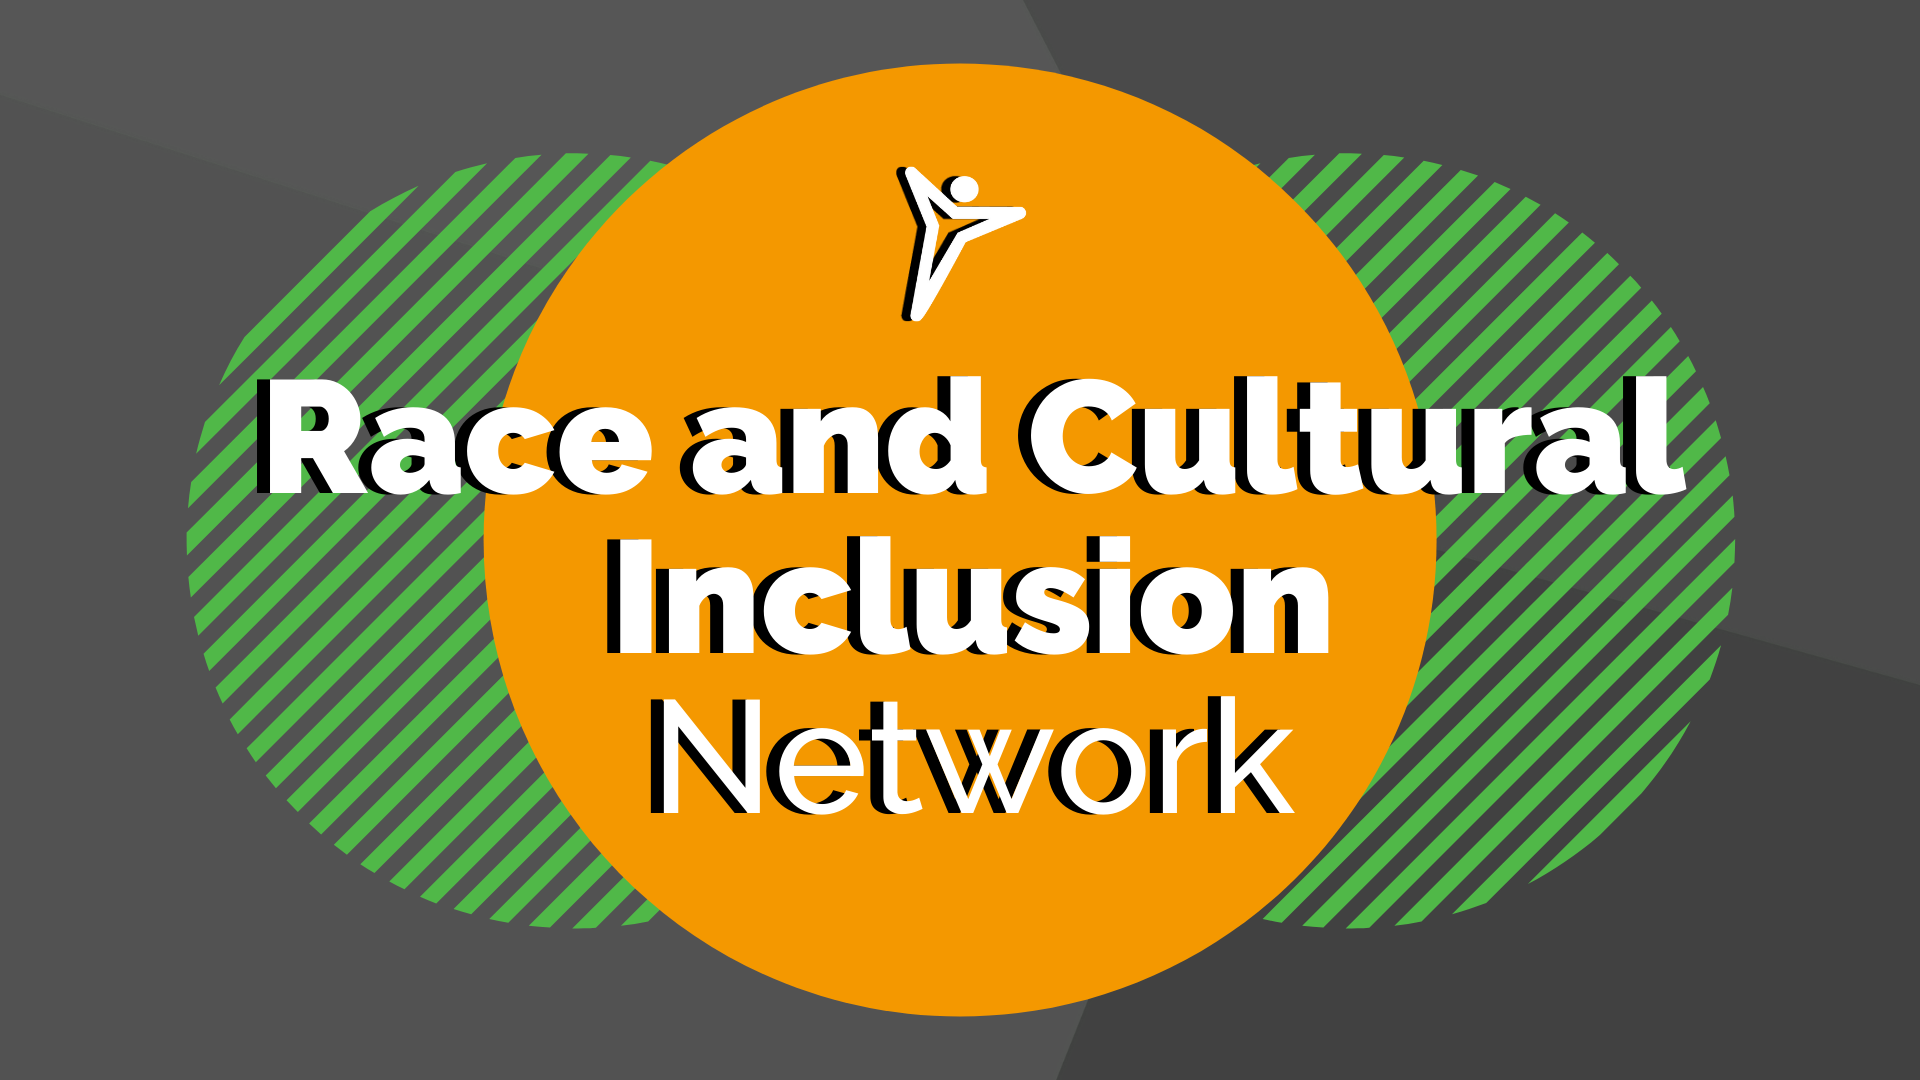 Race and Cultural Inclusion Network